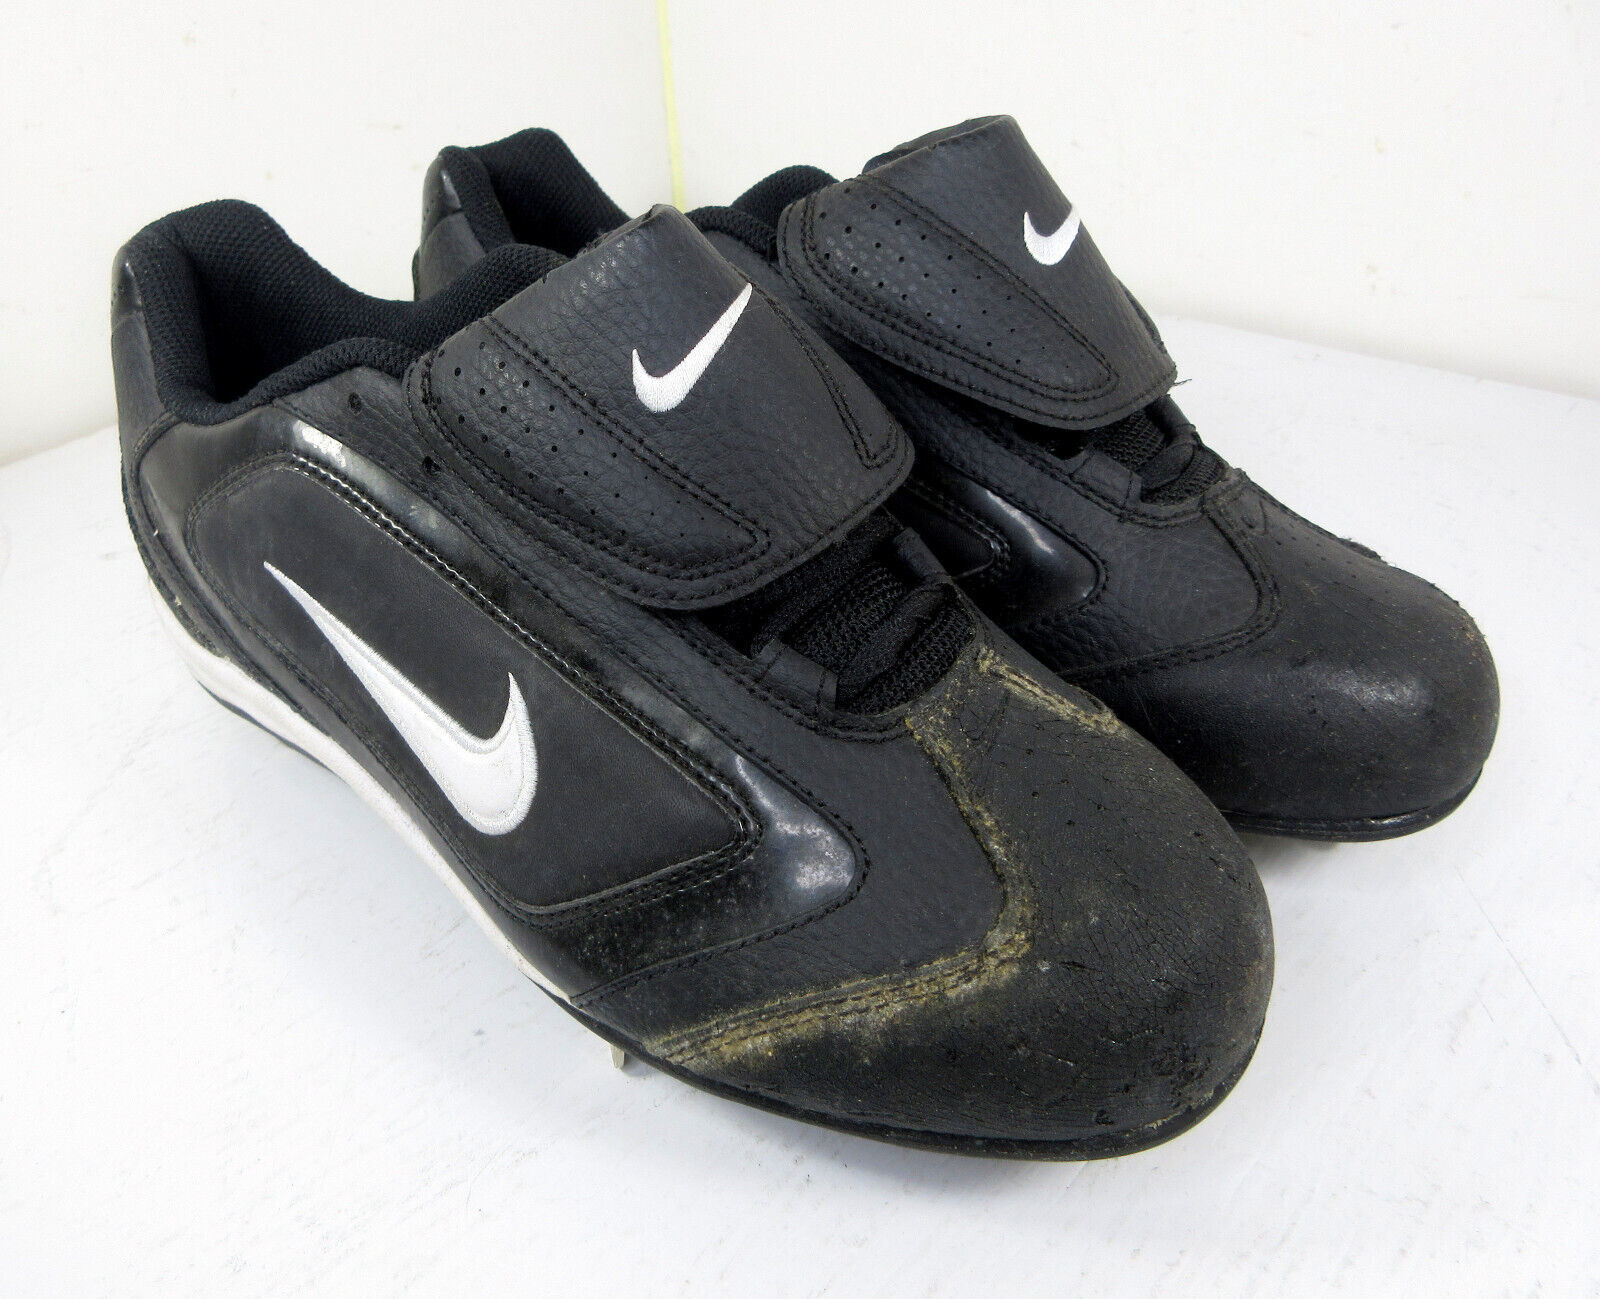 Primary image for Nike Baseball Cleats 020709 SF Black Covered Laces Size 7 US Mens/Youth 25CM